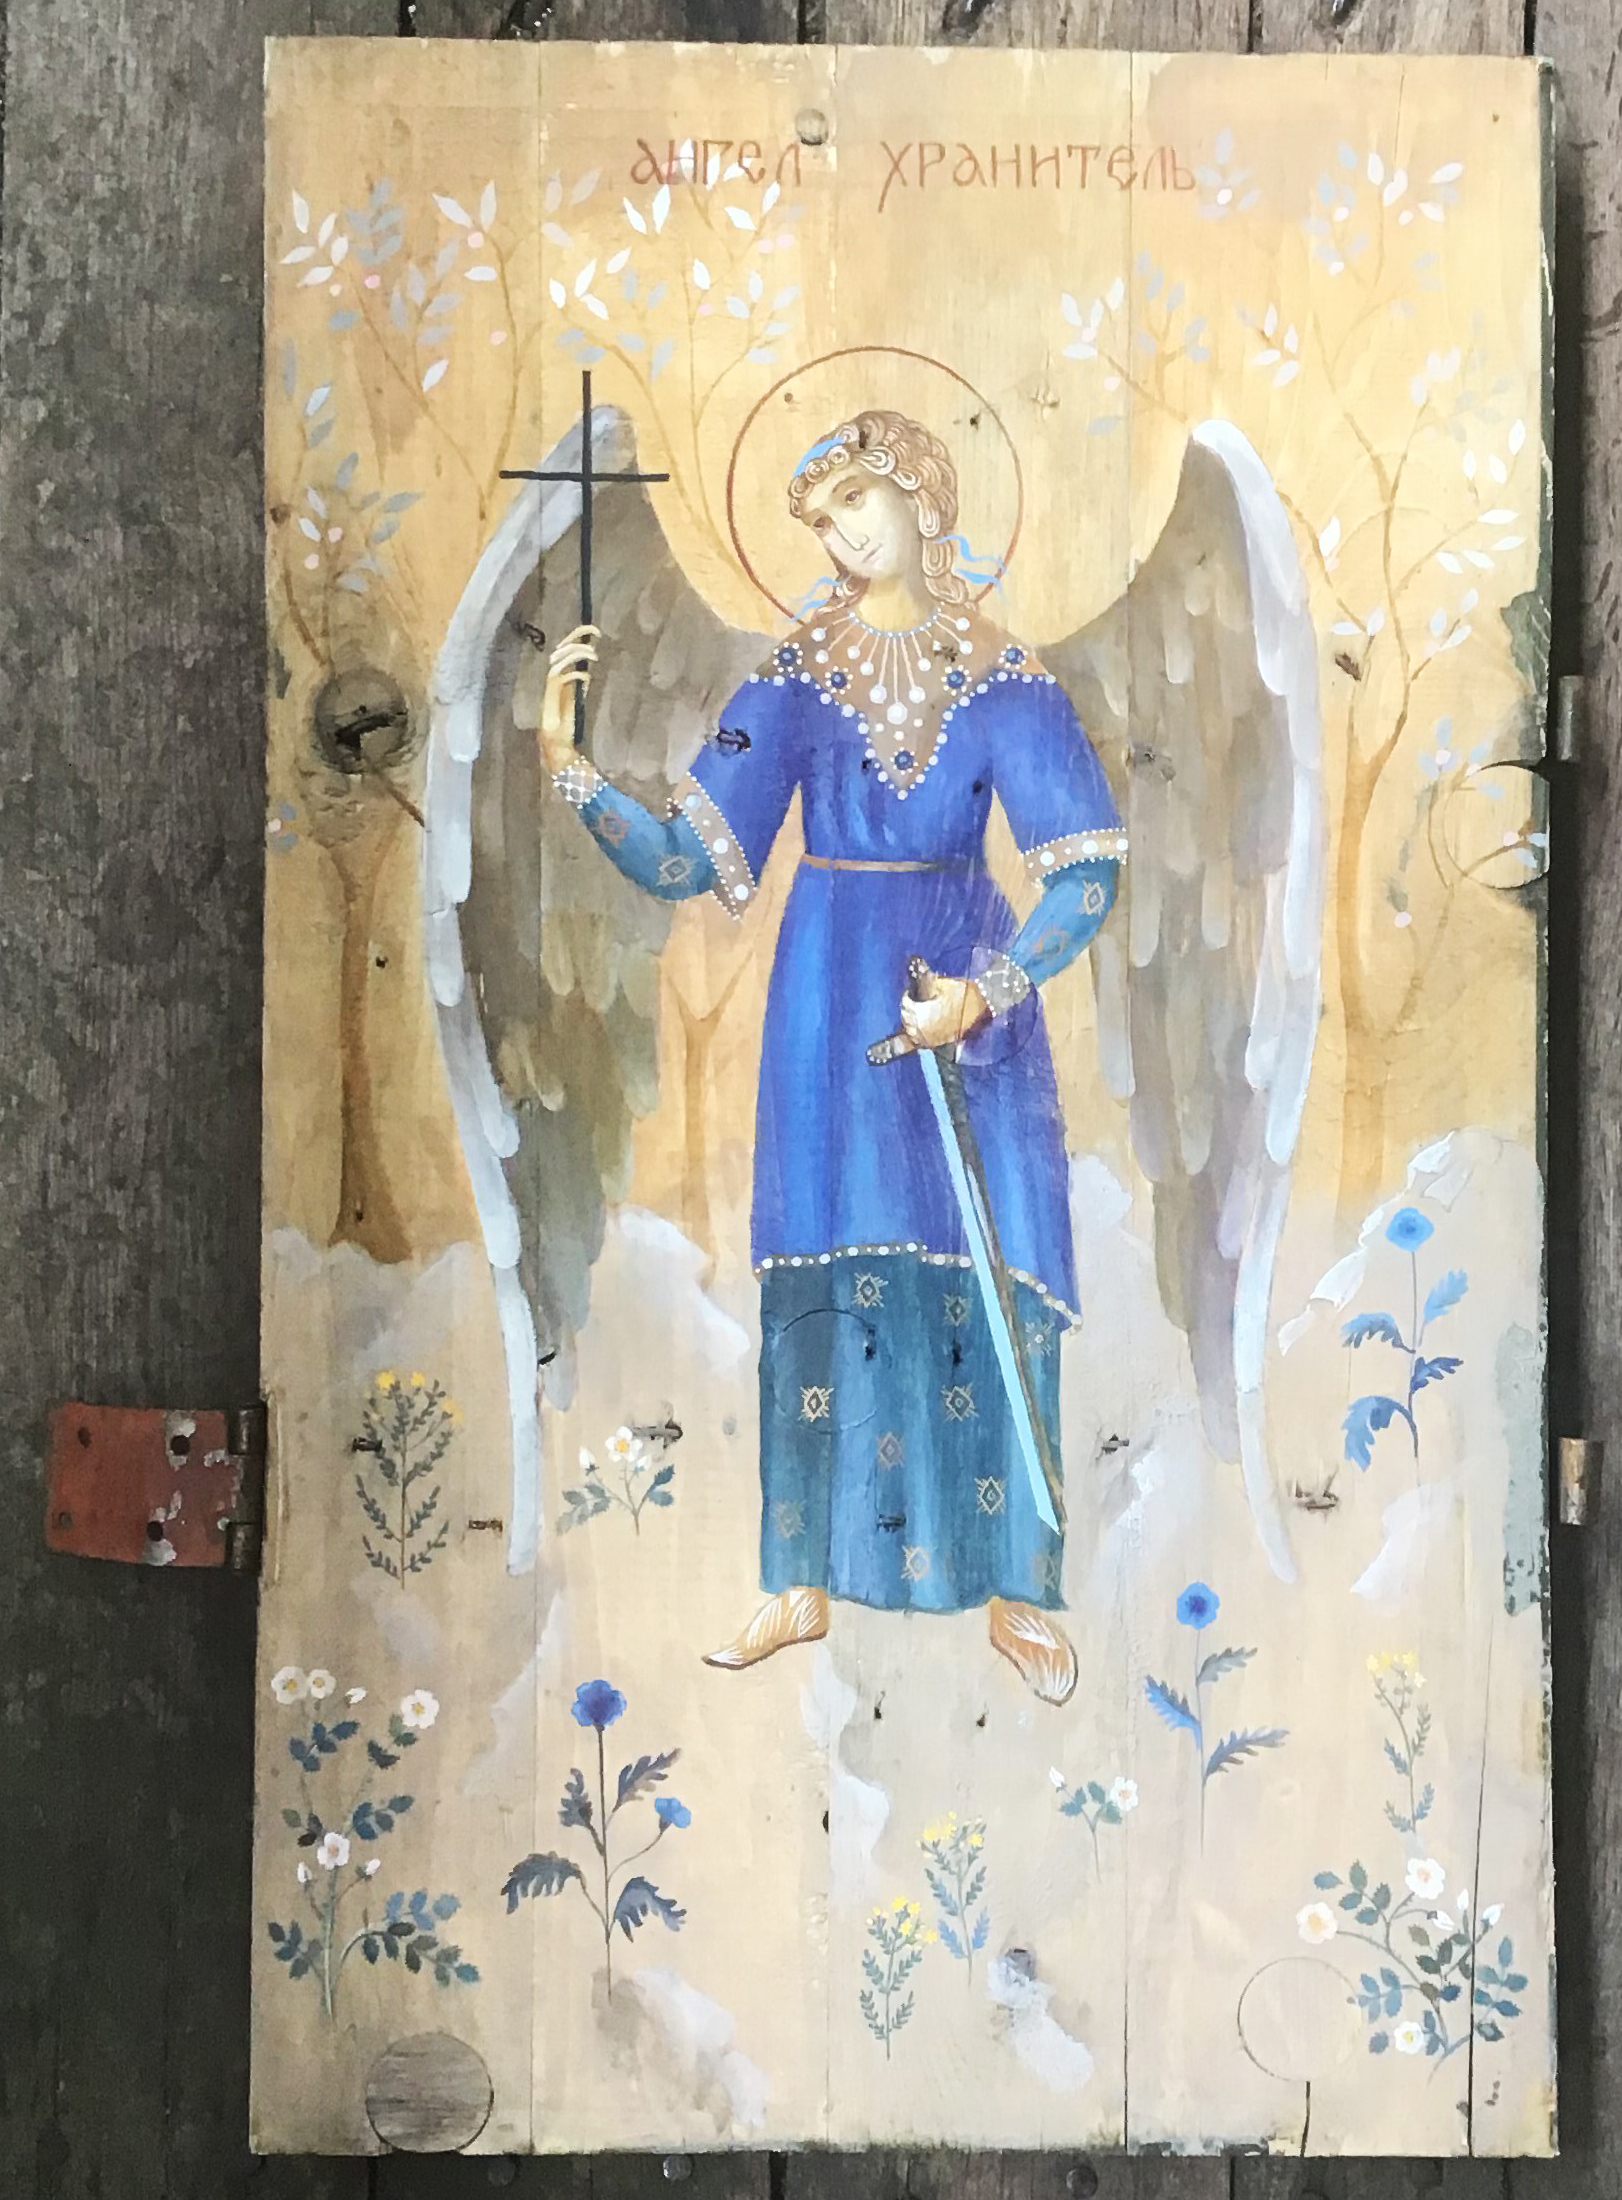 Guardian Angel from Icons on Ammunition Boxes series to benefit Ukraine